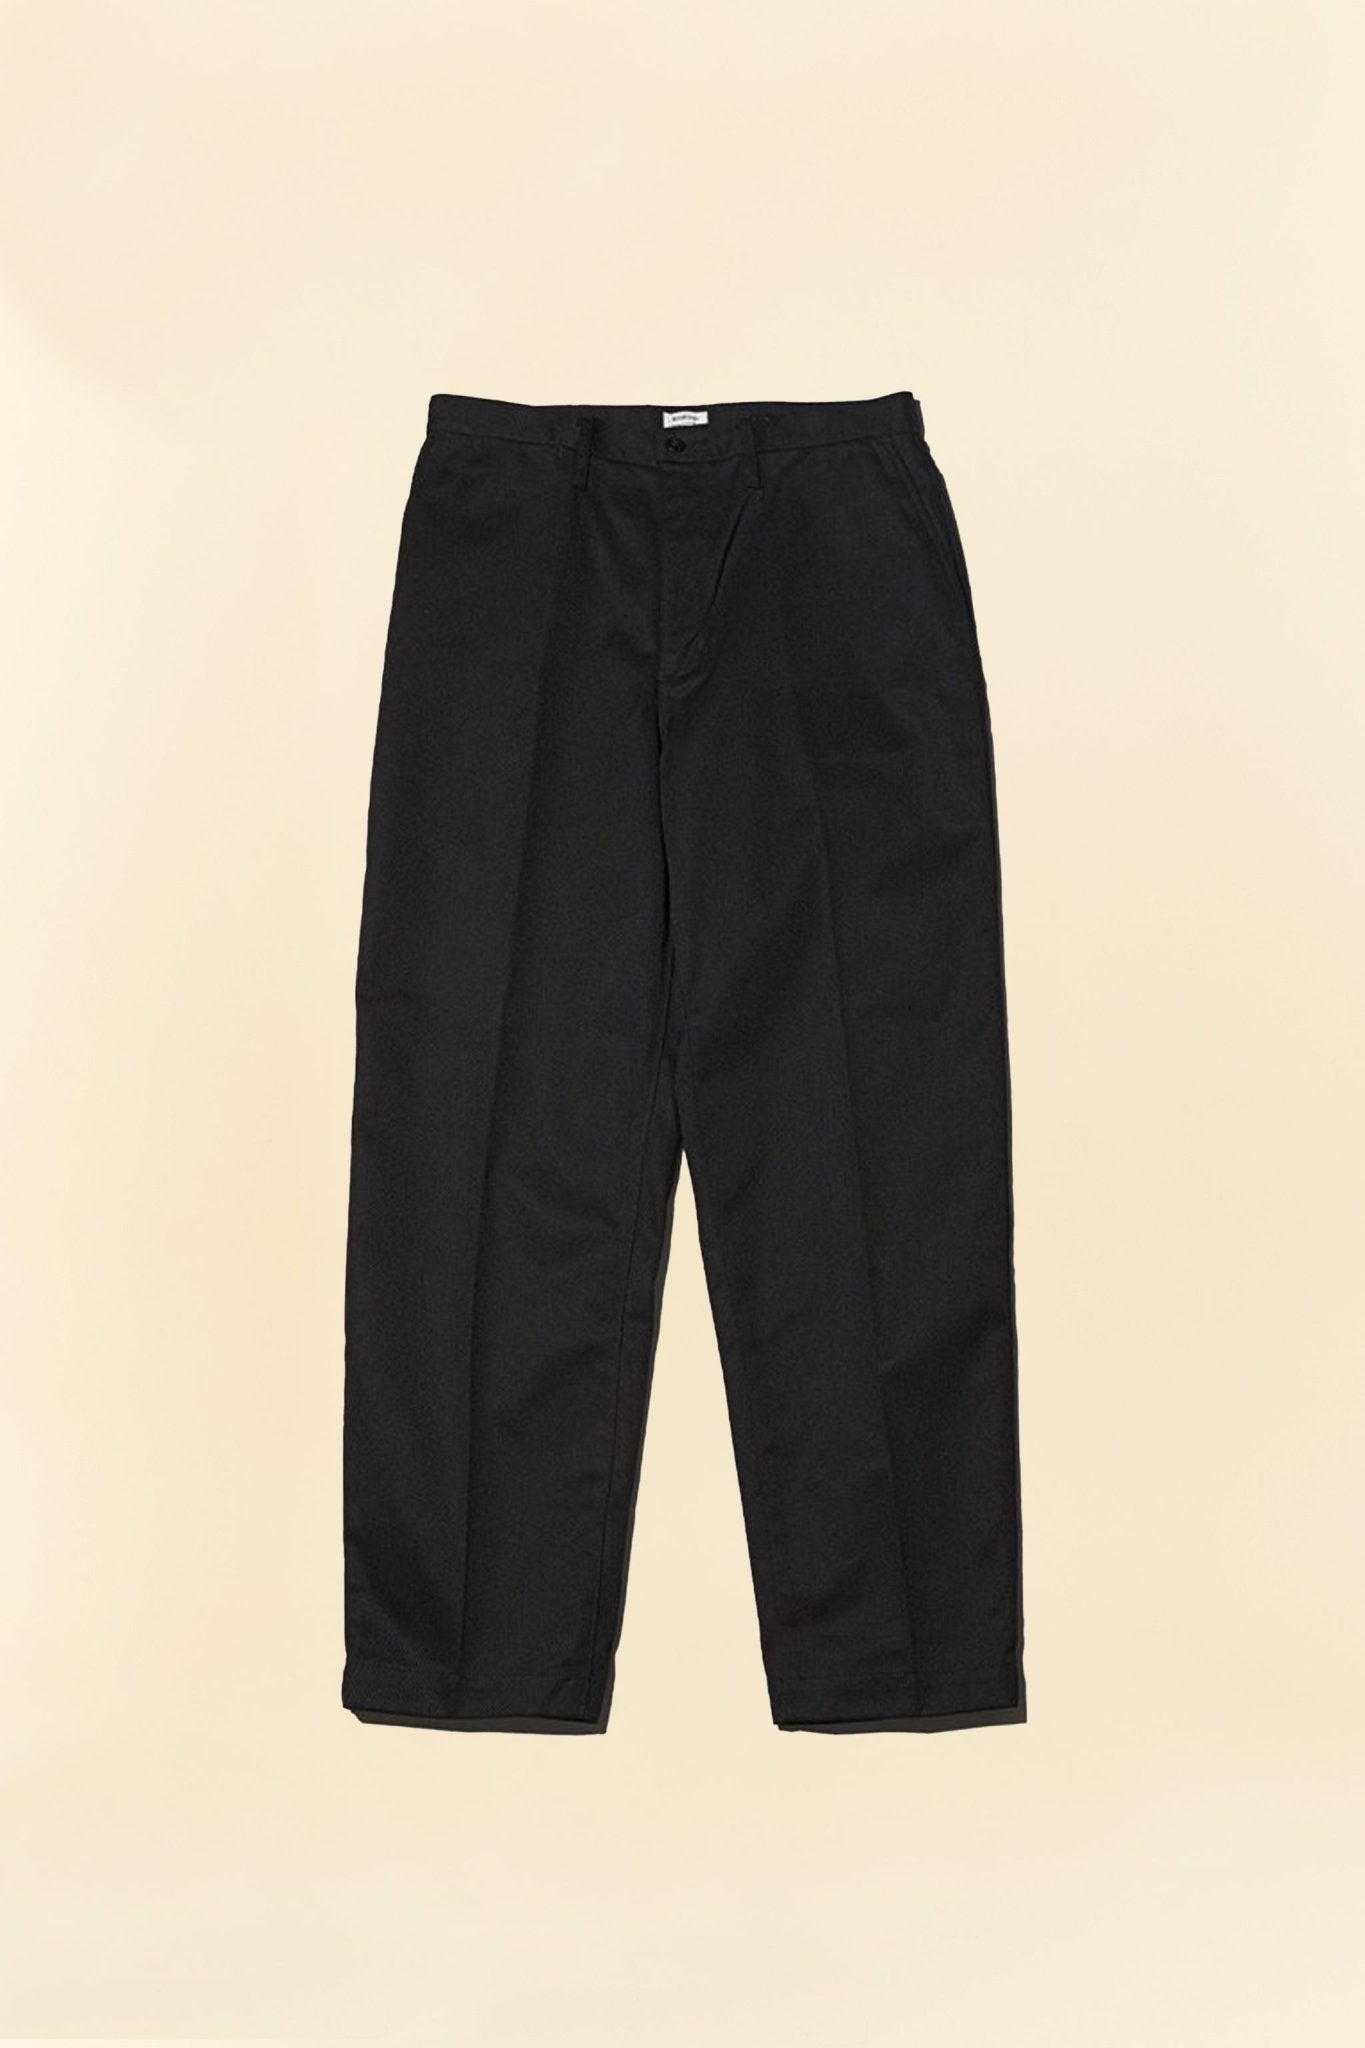 Radiall Motown Wide Tapered Fit Work Pants - Black -Radiall - URAHARA